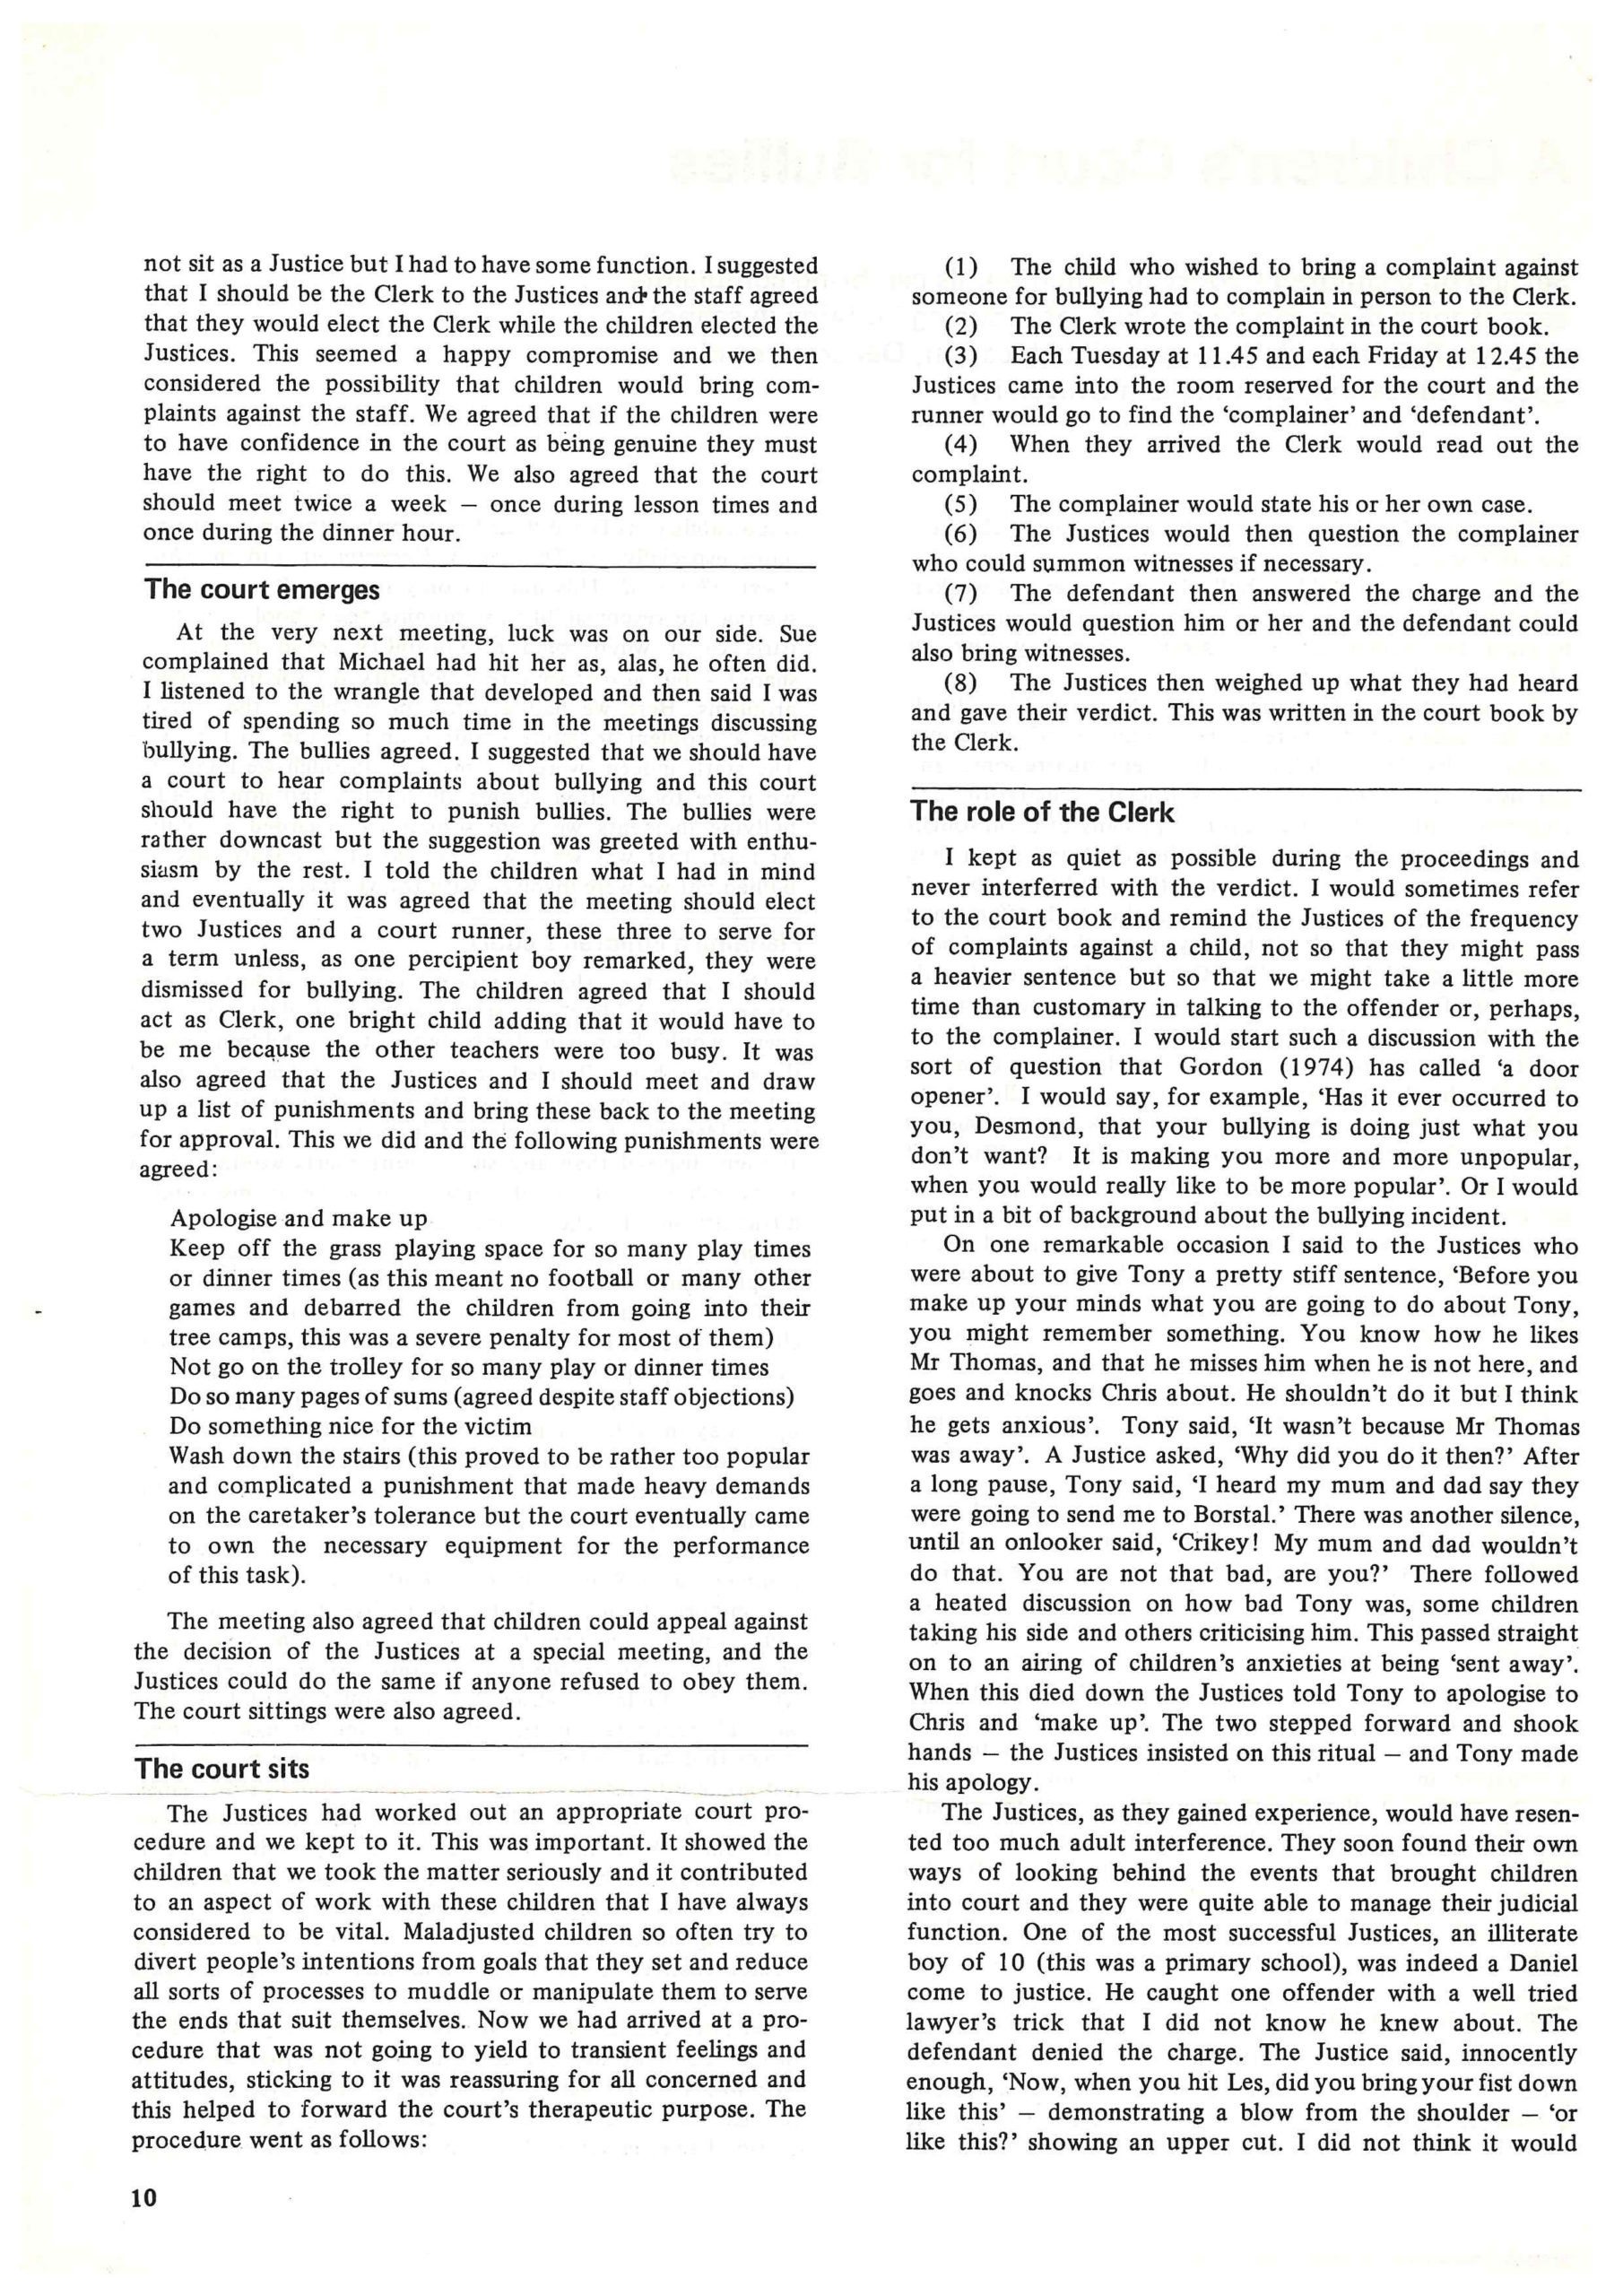 Special Education: Forward Trends, Vol 9, No.1 published in April 1982